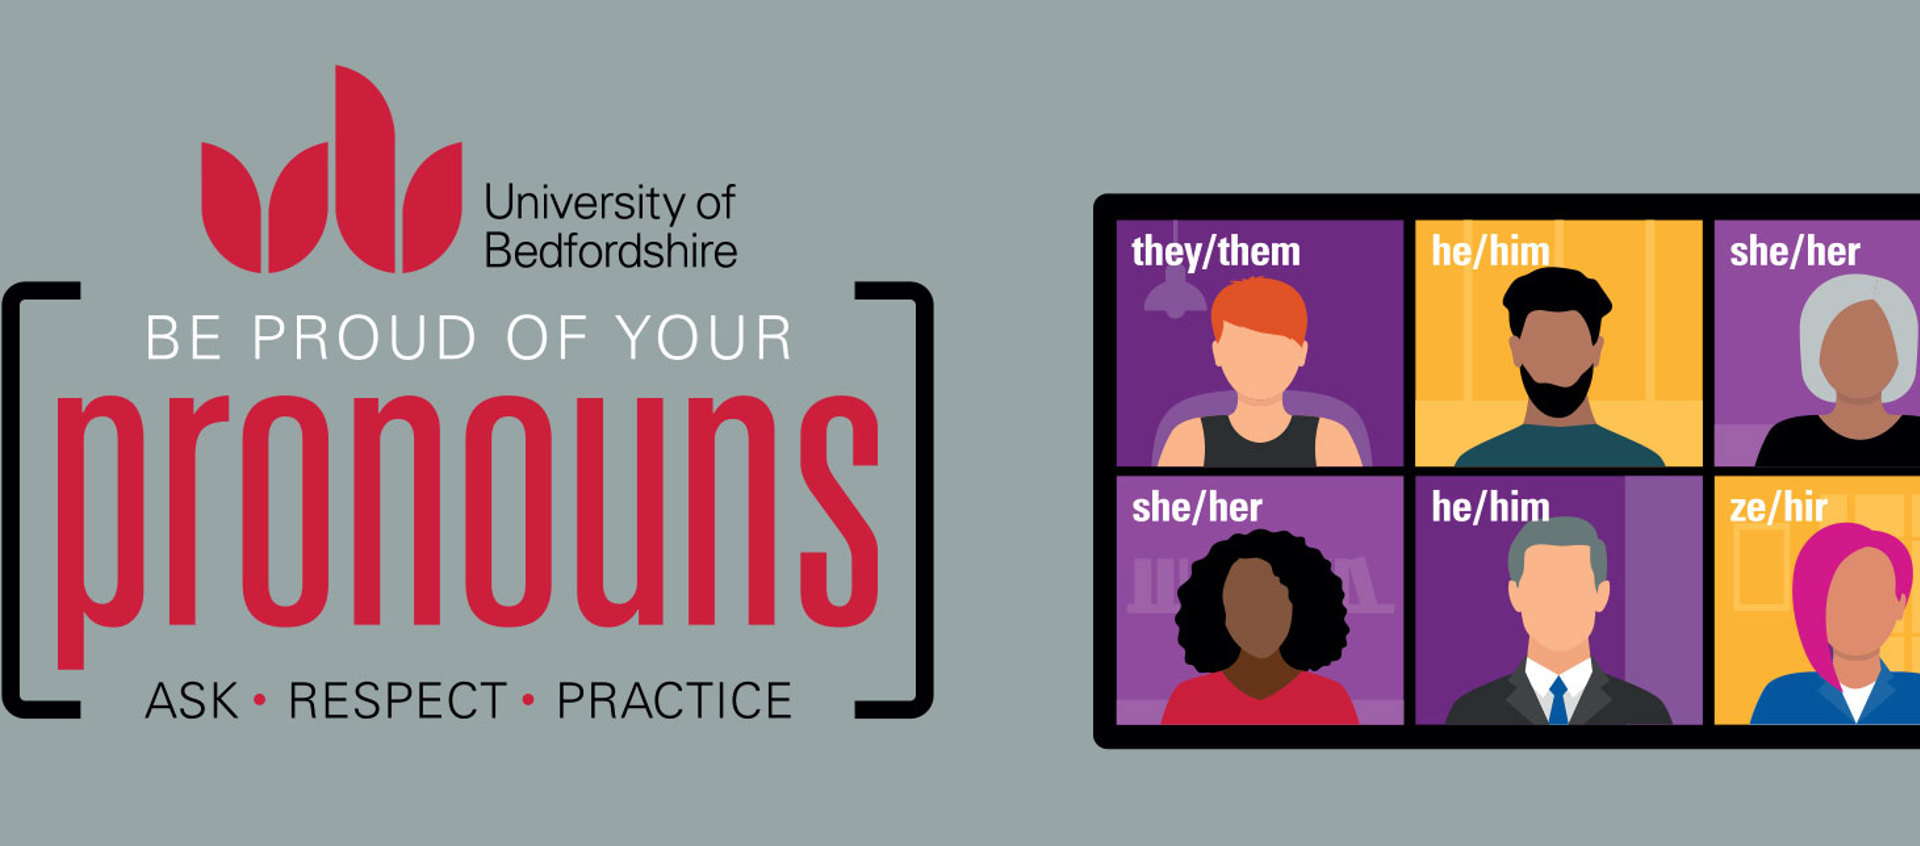 Be proud of your pronouns 